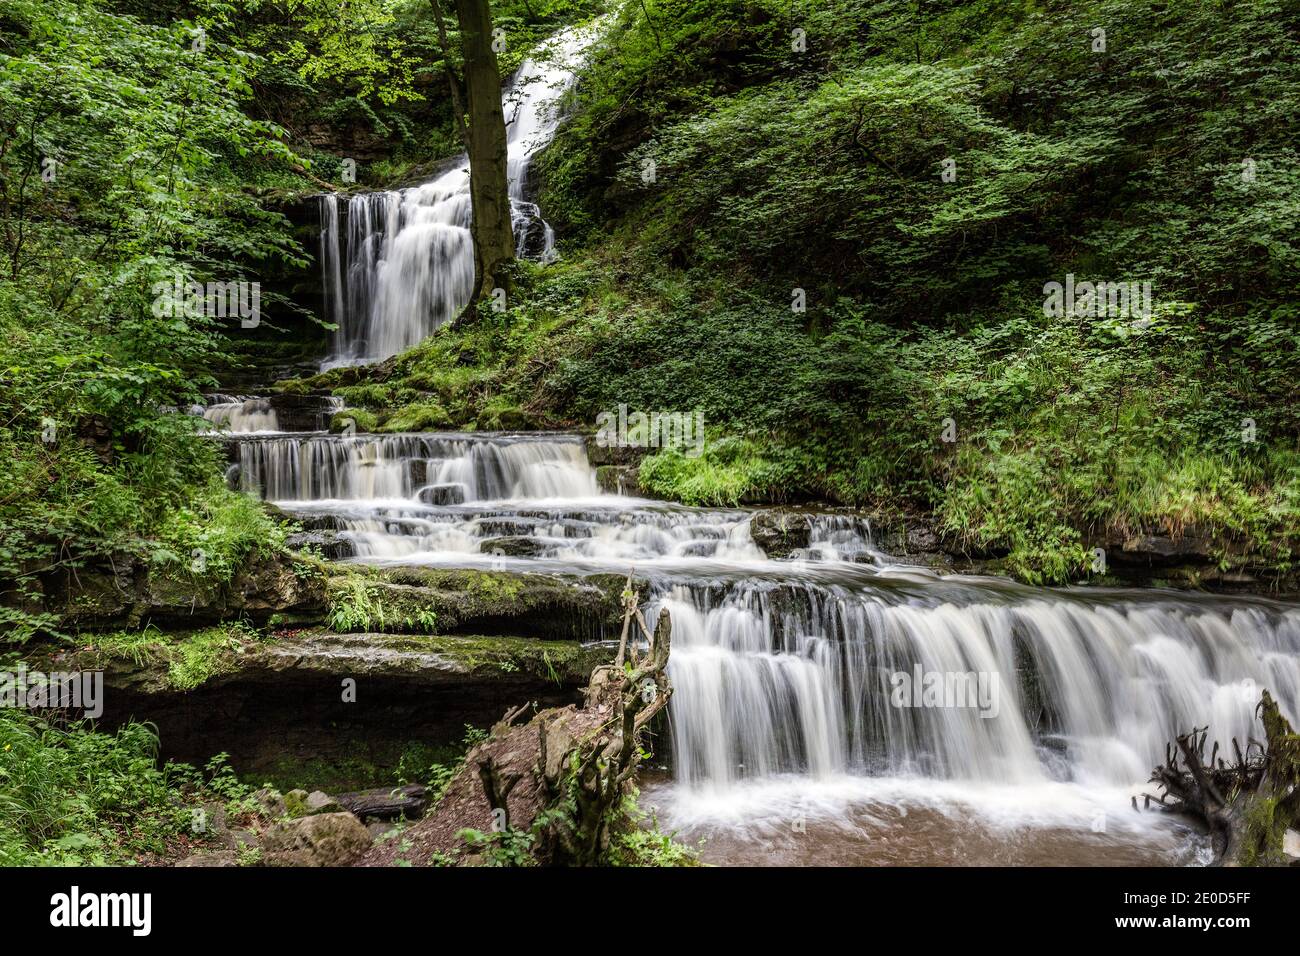 Scaleber Force Waterfall, Settle, Yorkshire Dales National Park, Inghilterra, Regno Unito Foto Stock